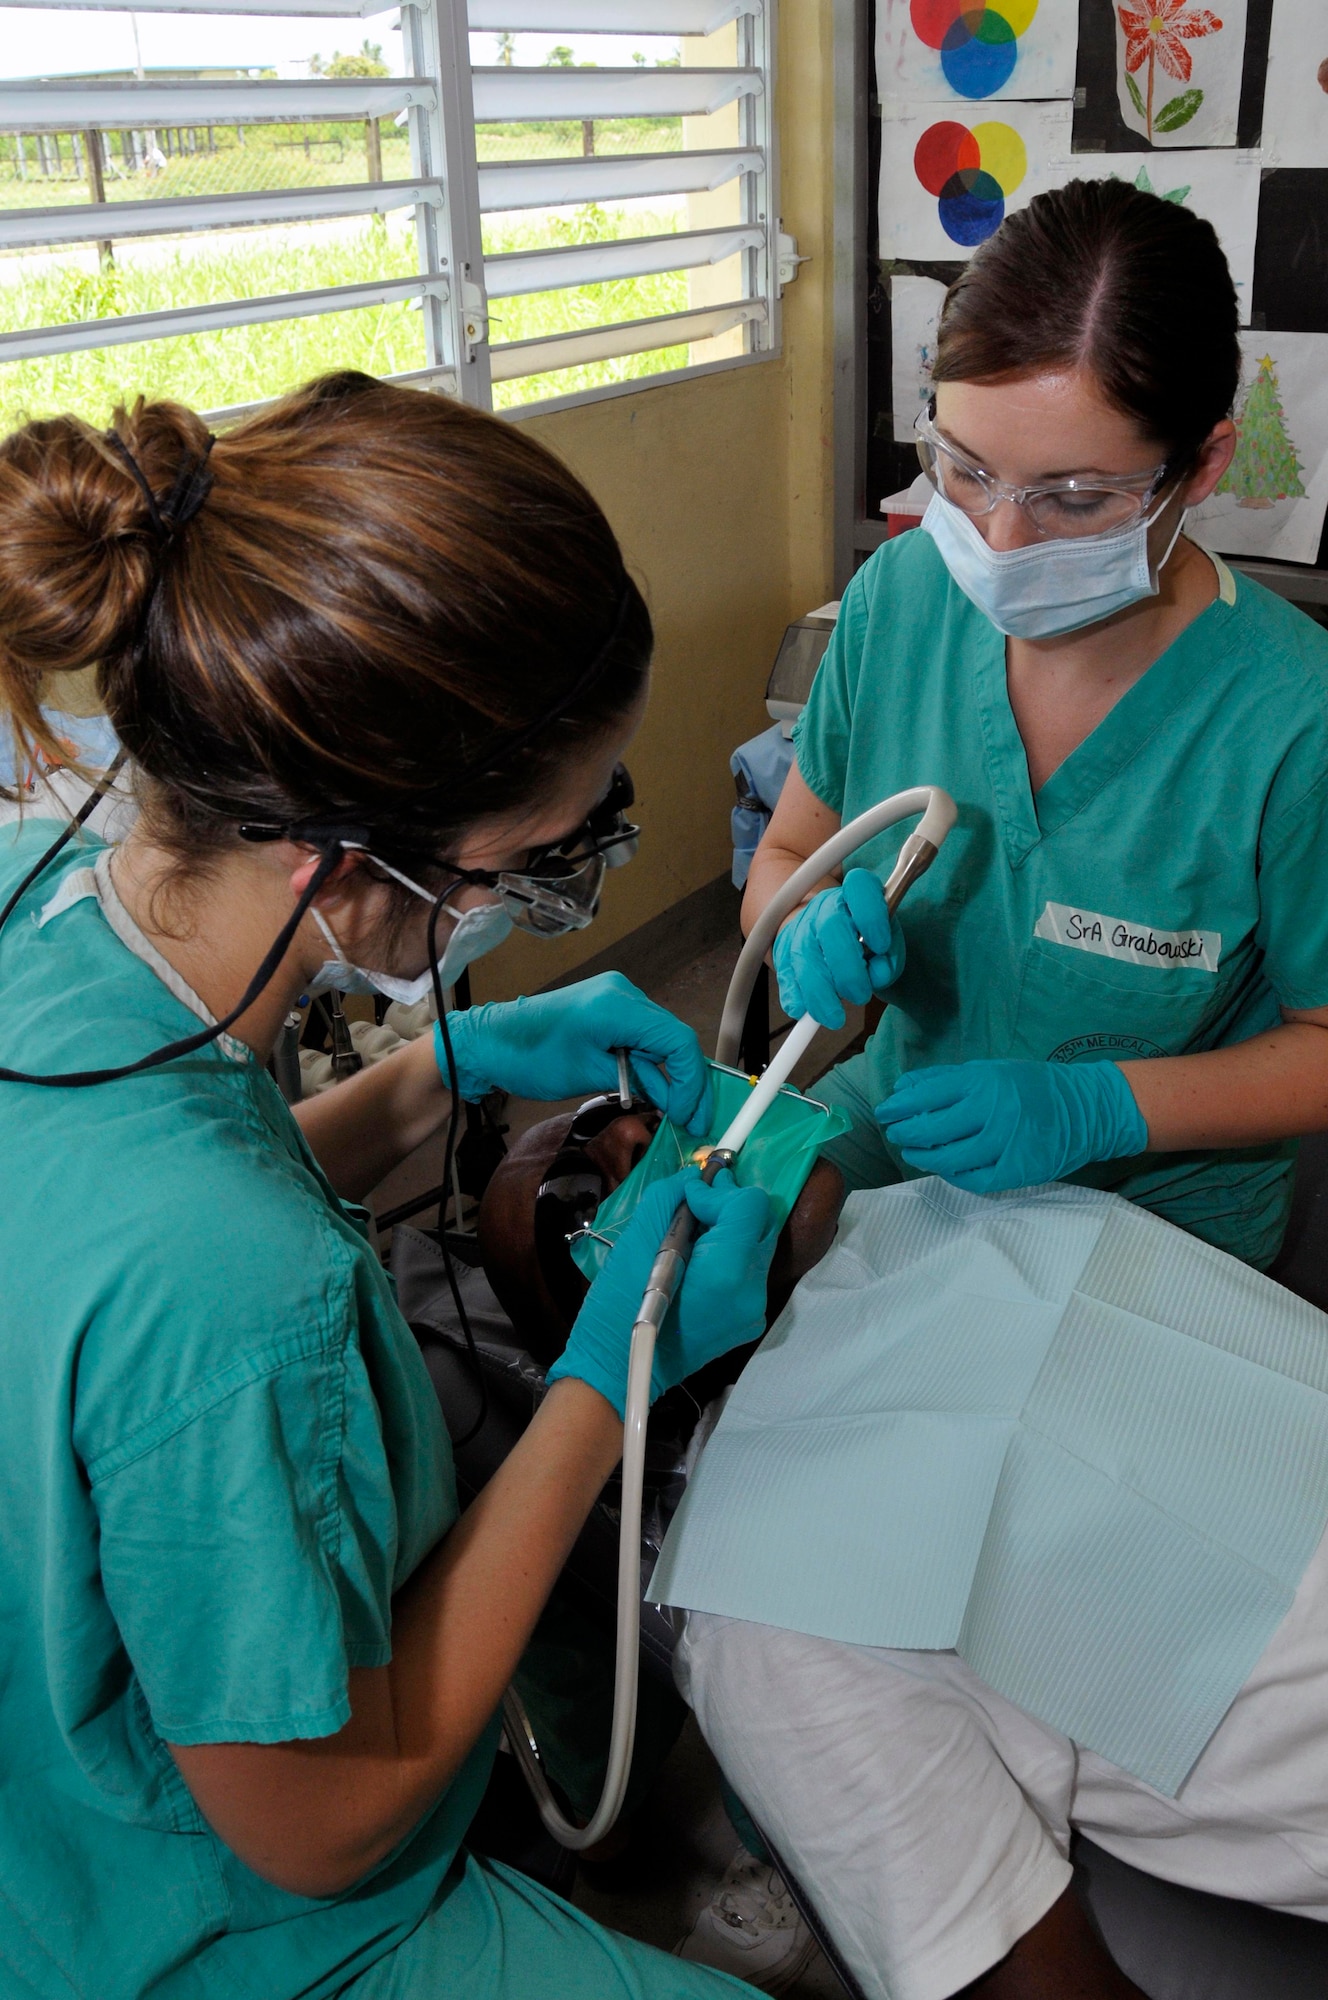 Capt. Kimberly Morio, Dentist, and Senior Airmen Brittany Grabowski, Dental Technician from the 375th Dental Squadron, Scott AFB, Illinois, gives a Guyanese man a filling at the Diamond School Aug 10, 2009, in Diamond, Guyana. The Airmen will be providing dental care to the local population for free during New Horizons Guyana, a $9 million exercise designed to strengthen ties with partner nations in Central and South America through combined quality of life improvement projects.(U.S. Air Force photo by Airman 1st Class Perry Aston) (Released)